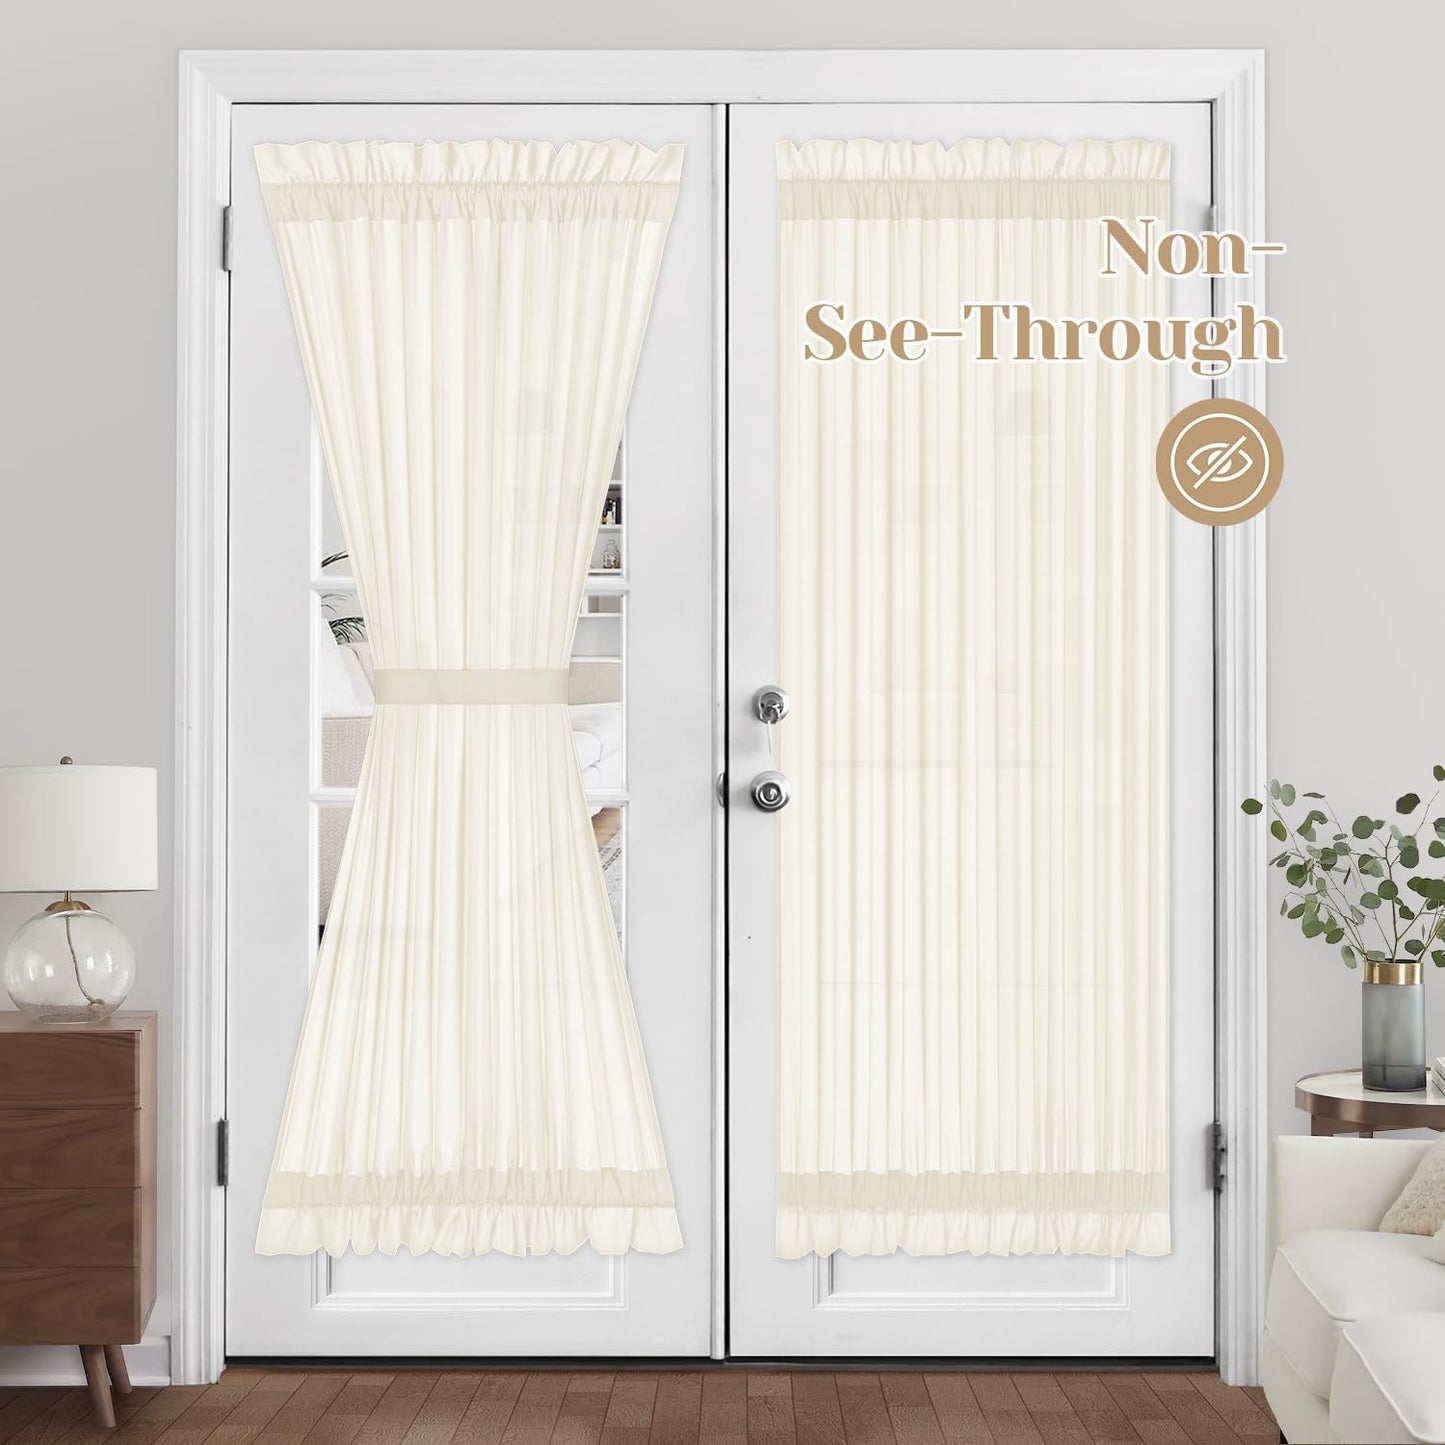 HOMEIDEAS Non-See-Through Sidelight Curtains for Front Door, Privacy Semi Sheer Door Window Curtains, Rod Pocket Light Filtering French Door Curtains with Tieback, (1 Panel, White, 26W X 72L)  HOMEIDEAS Cream Beige 1 Panel-54 X 72 